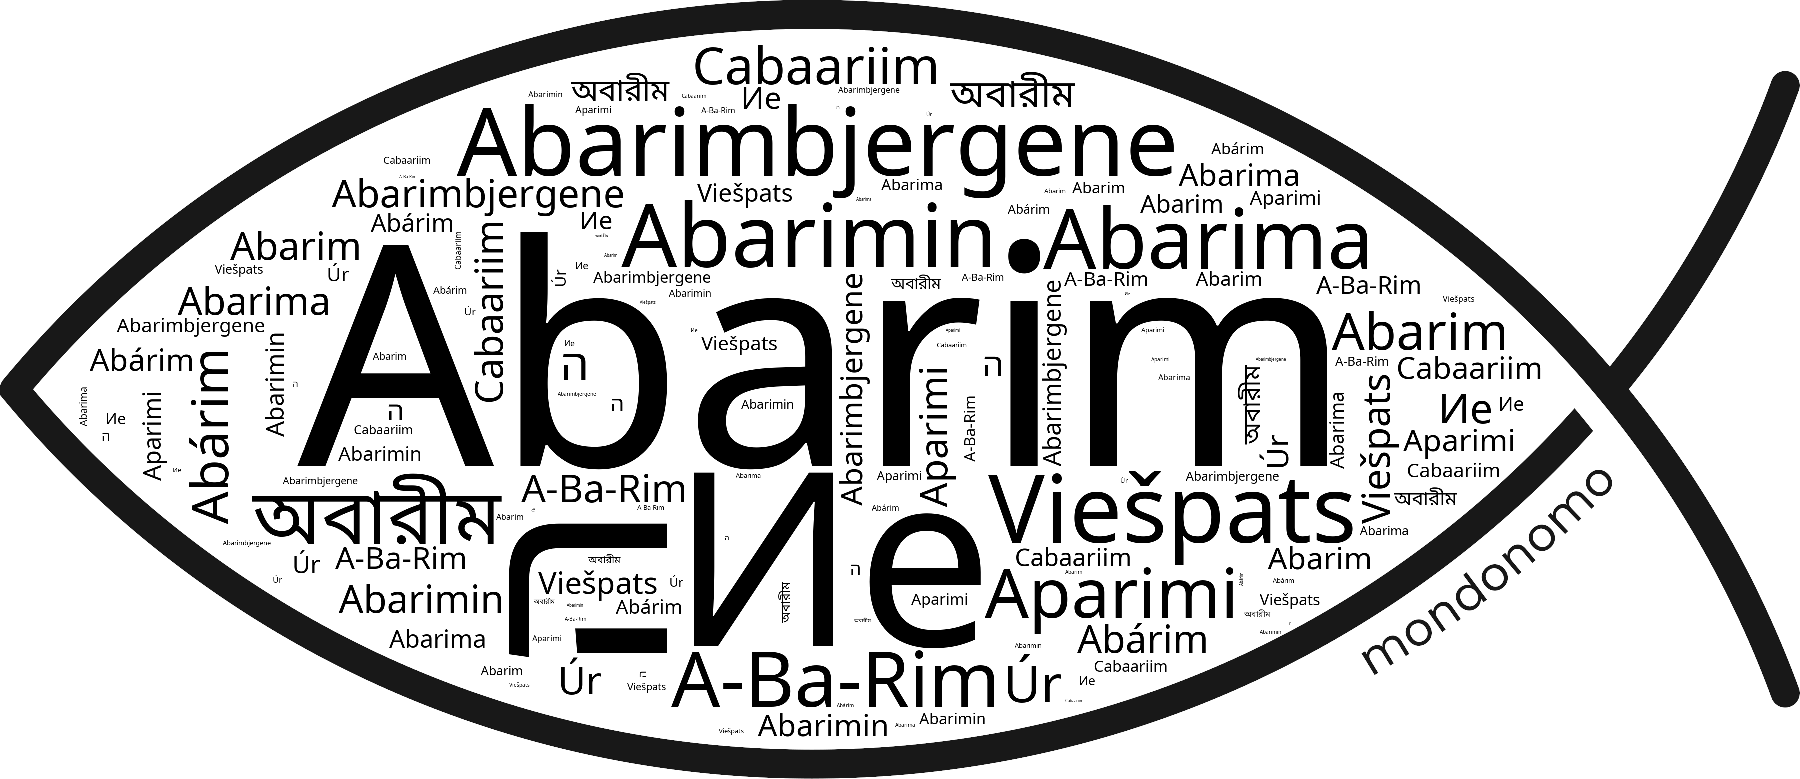 Name Abarim in the world's Bibles